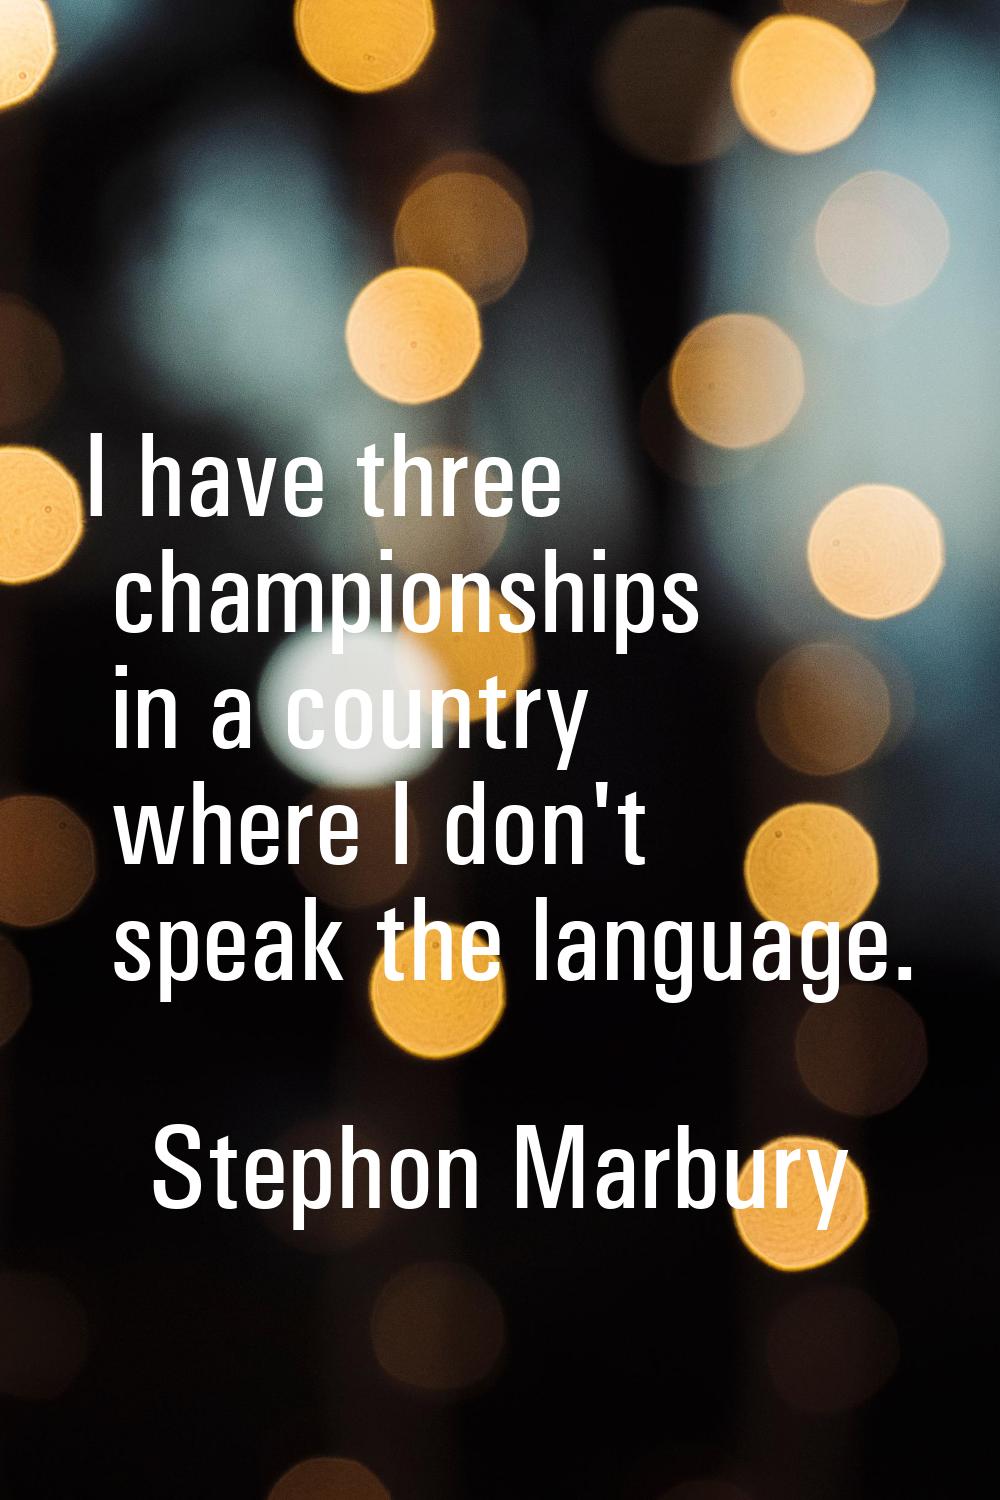 I have three championships in a country where I don't speak the language.